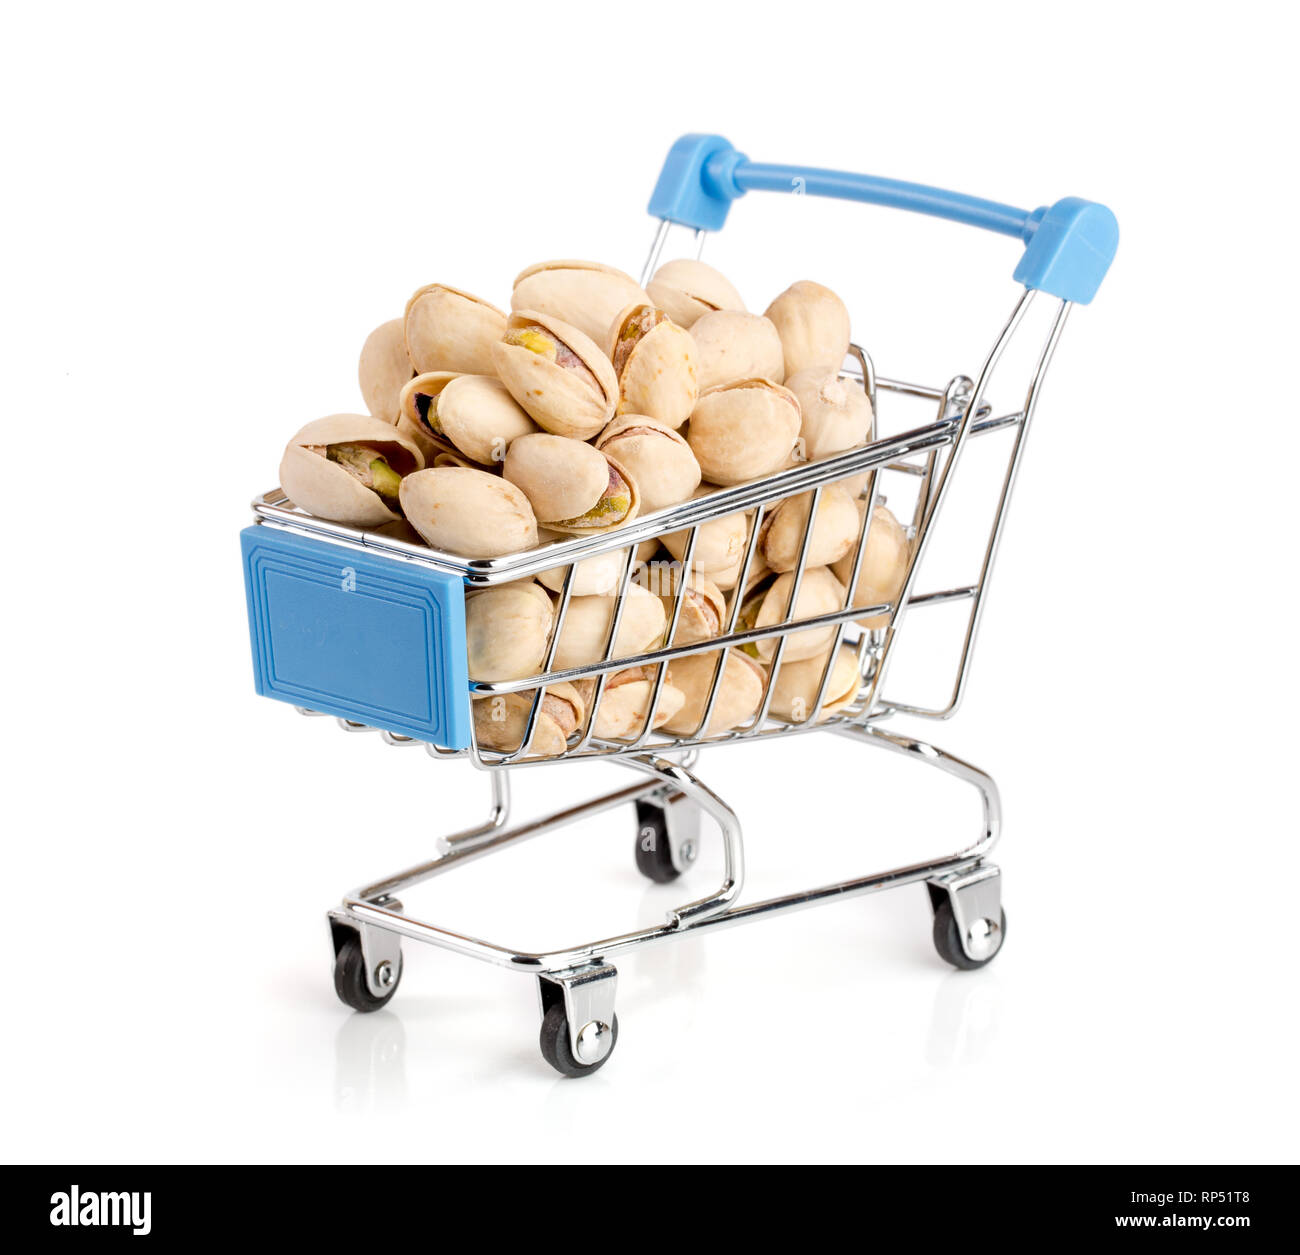 Pistachio in a shopping cart isolated on white background. Stock Photo